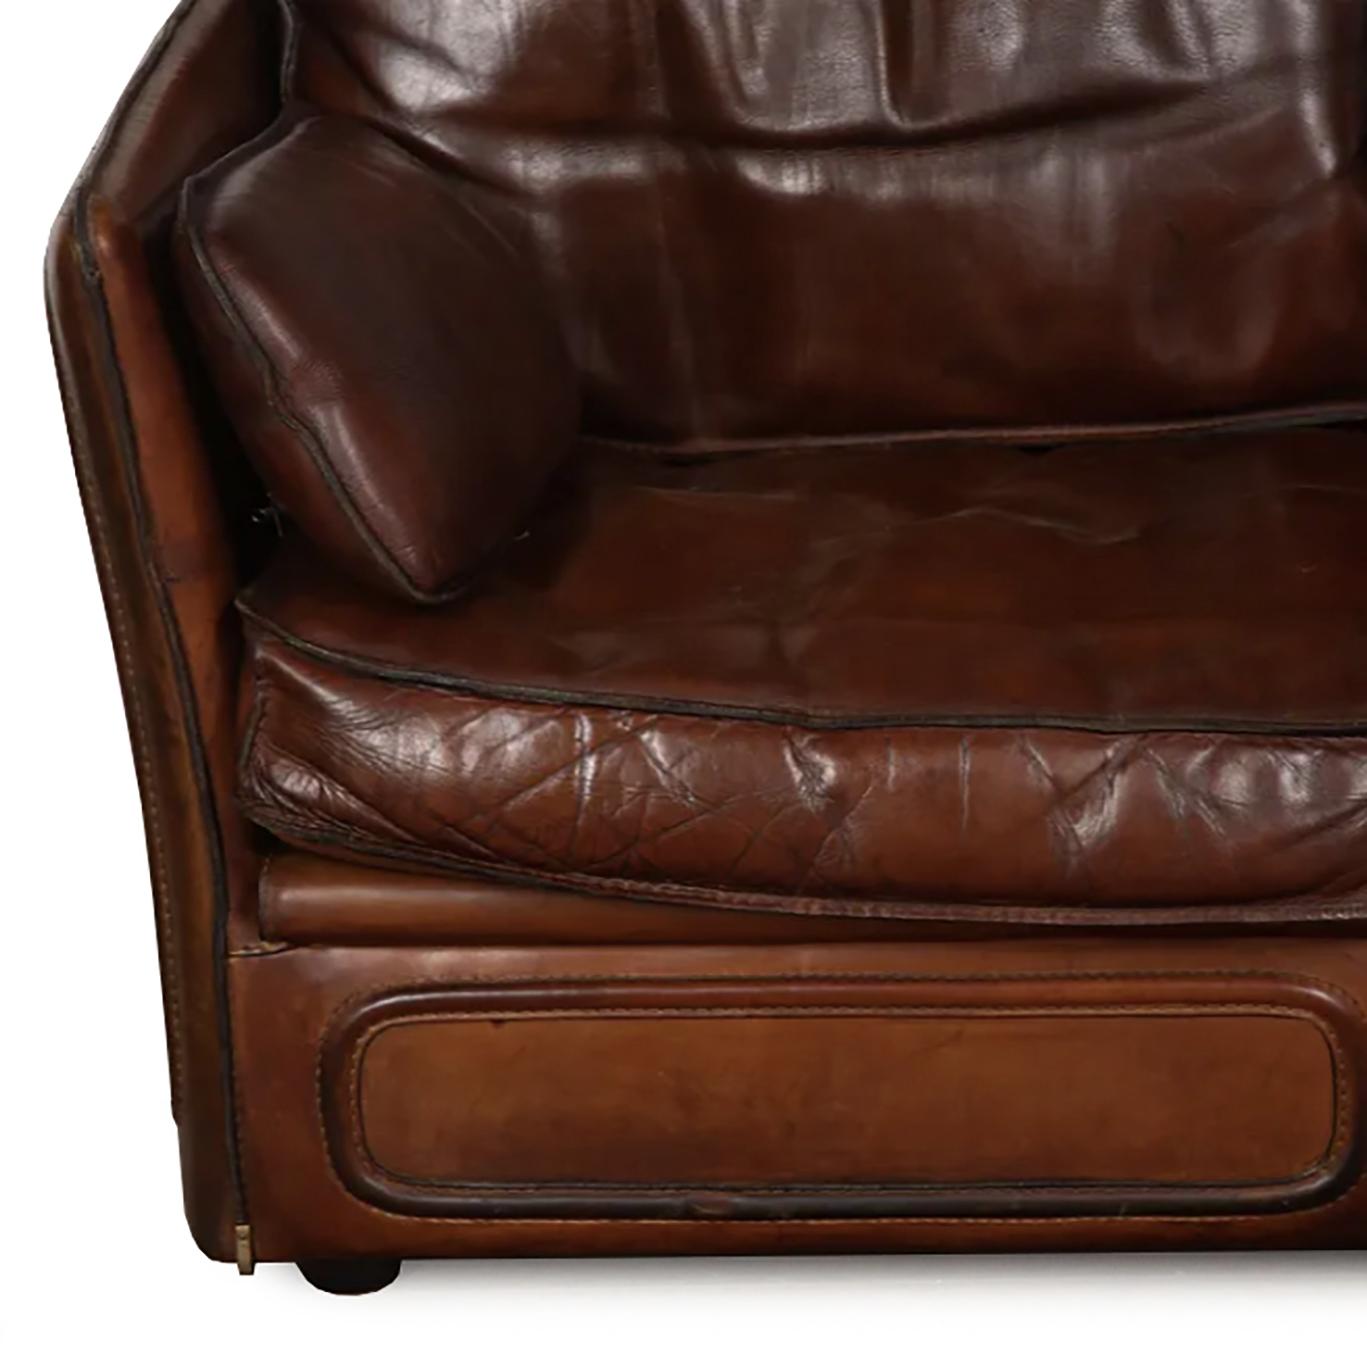 Roche Bobois Saddle Leather Sofa After Hermes In Good Condition For Sale In London, GB